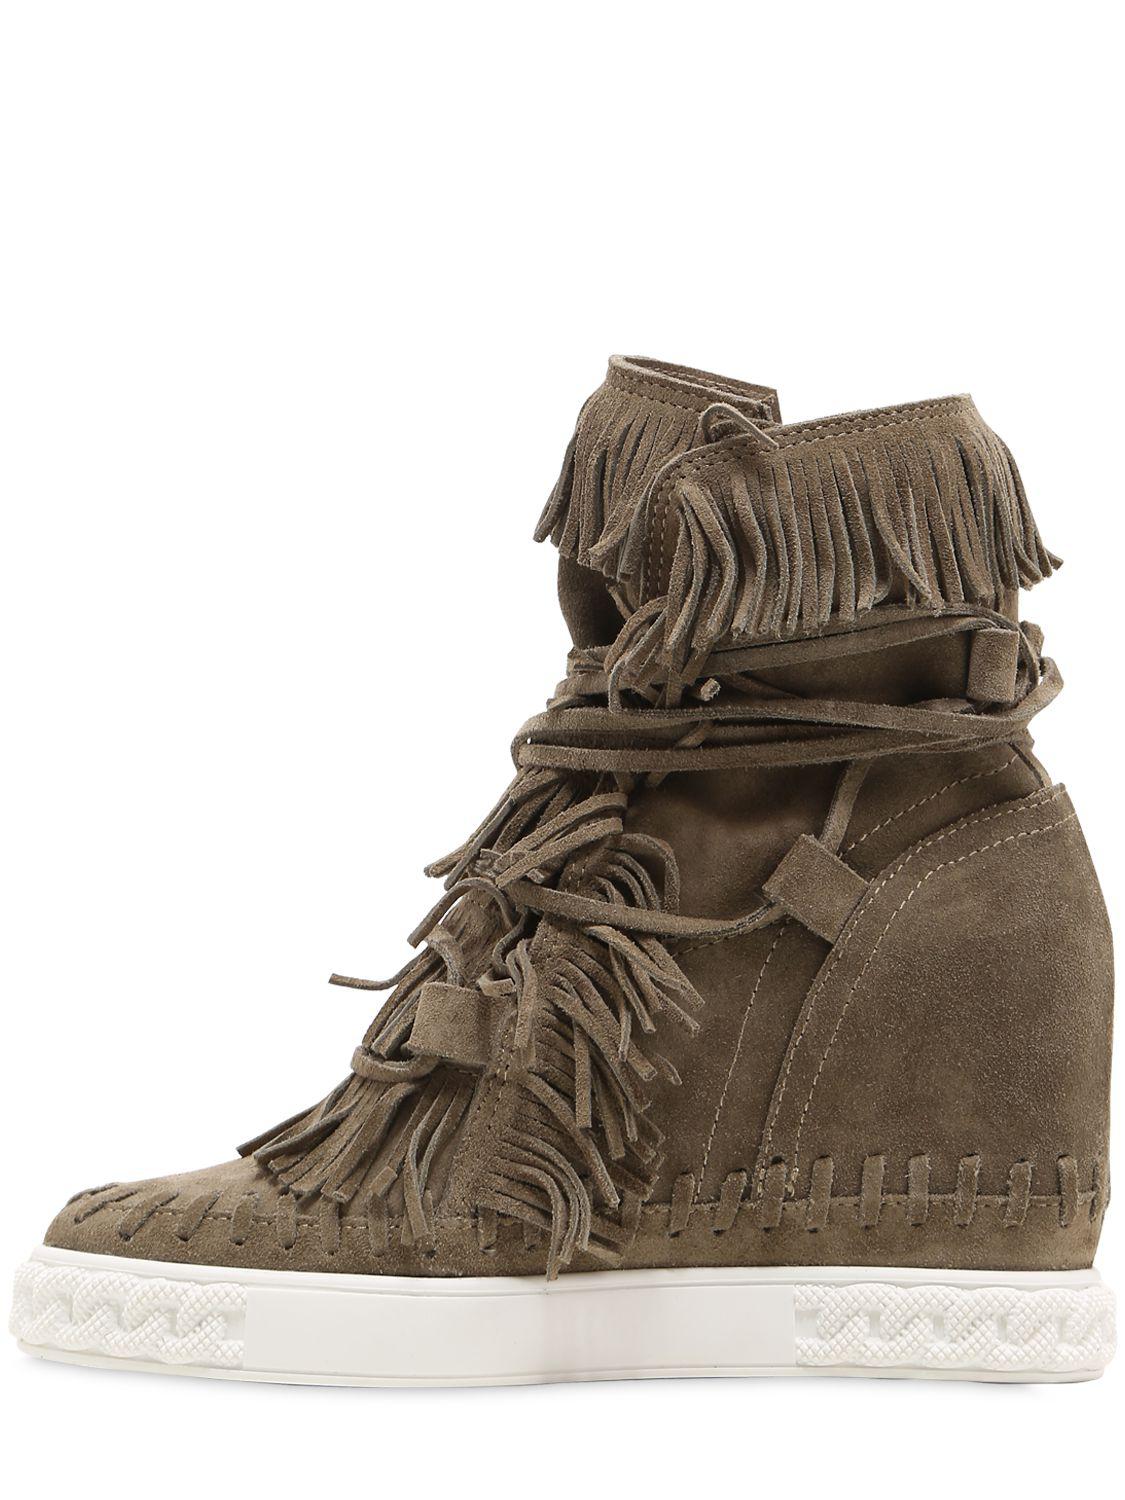 Casadei 80mm Fringed Suede Wedge Boots - Lyst